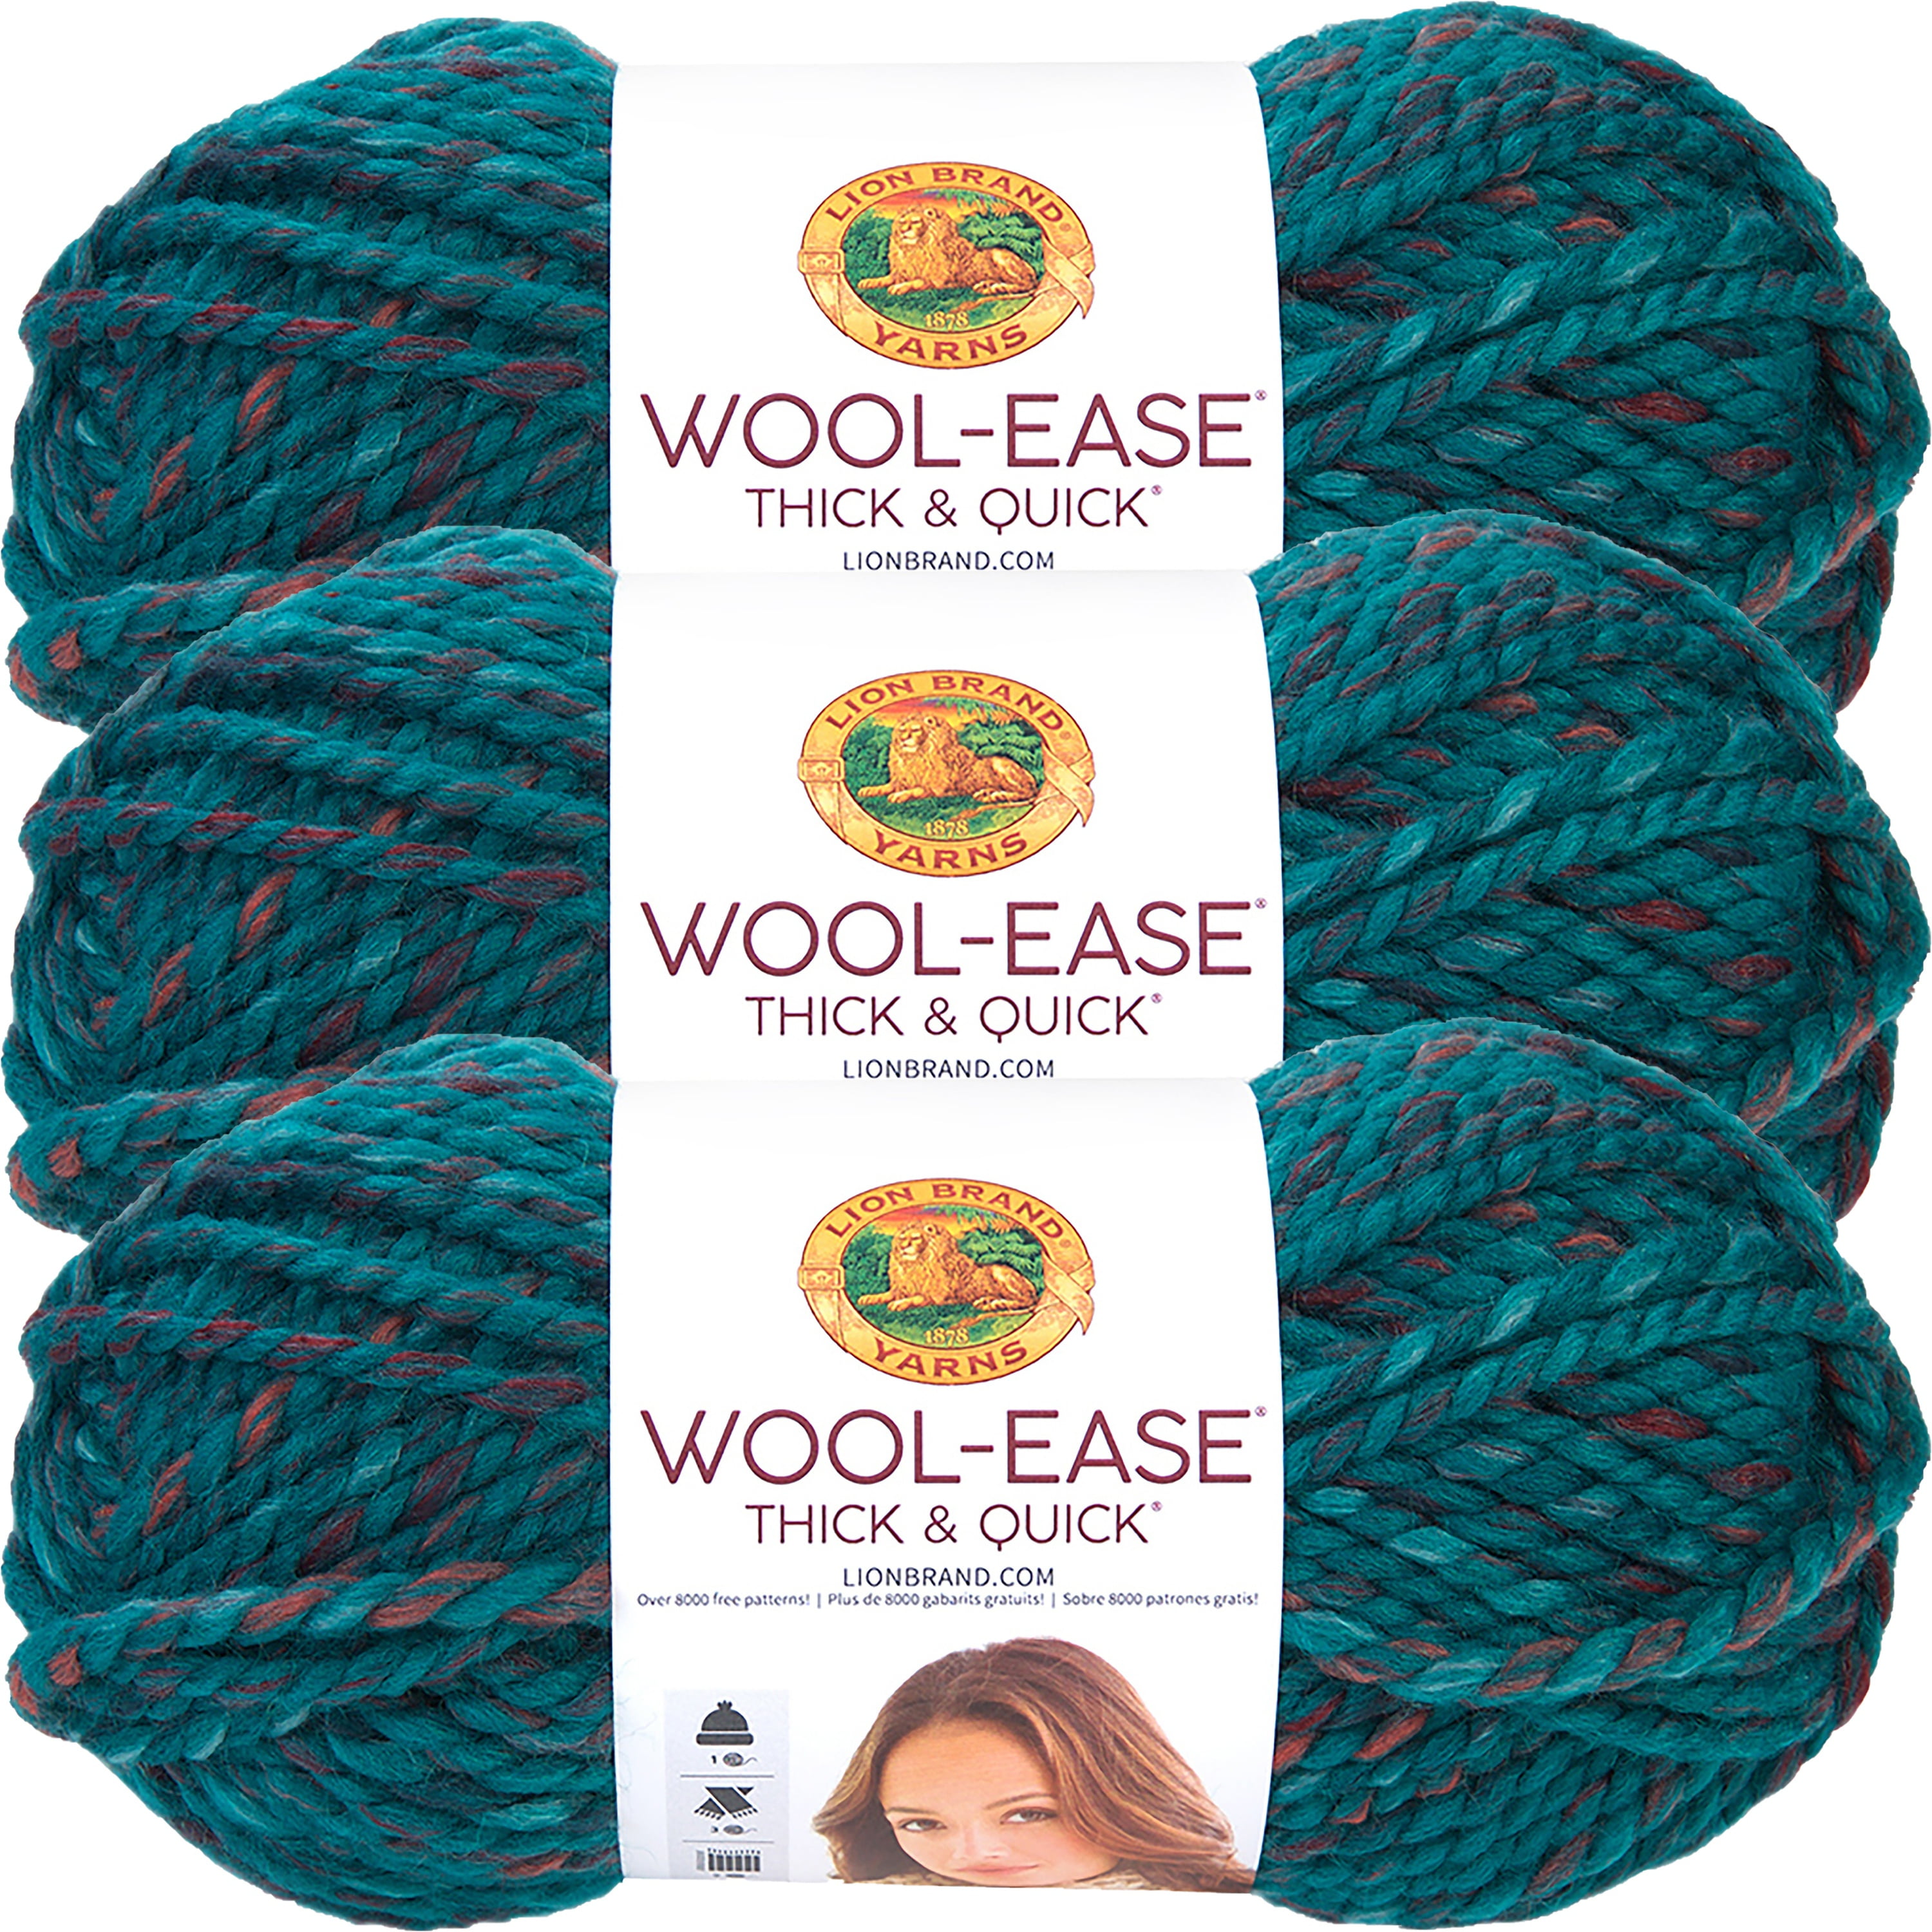 Lion Brand Wool Ease Thick & Quick Yarn - Kale